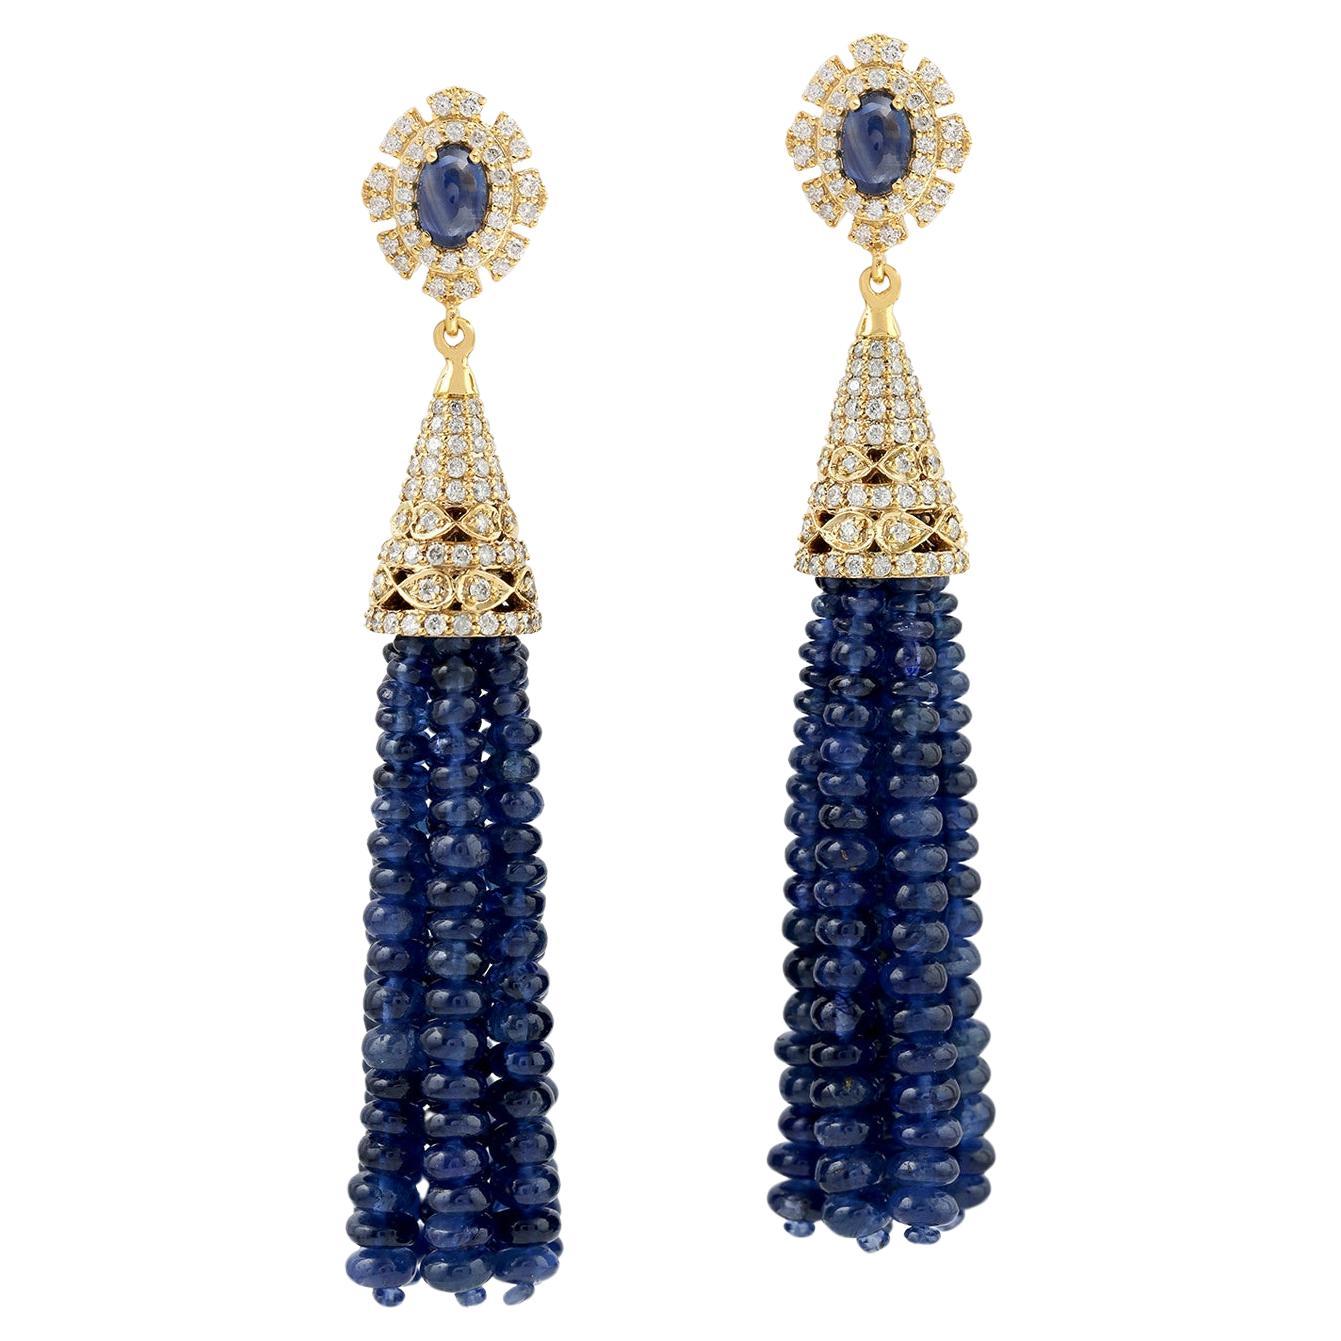 82.67ct Blue Sapphire Tassel Earrings With Diamonds Made In 18k Yellow Gold For Sale